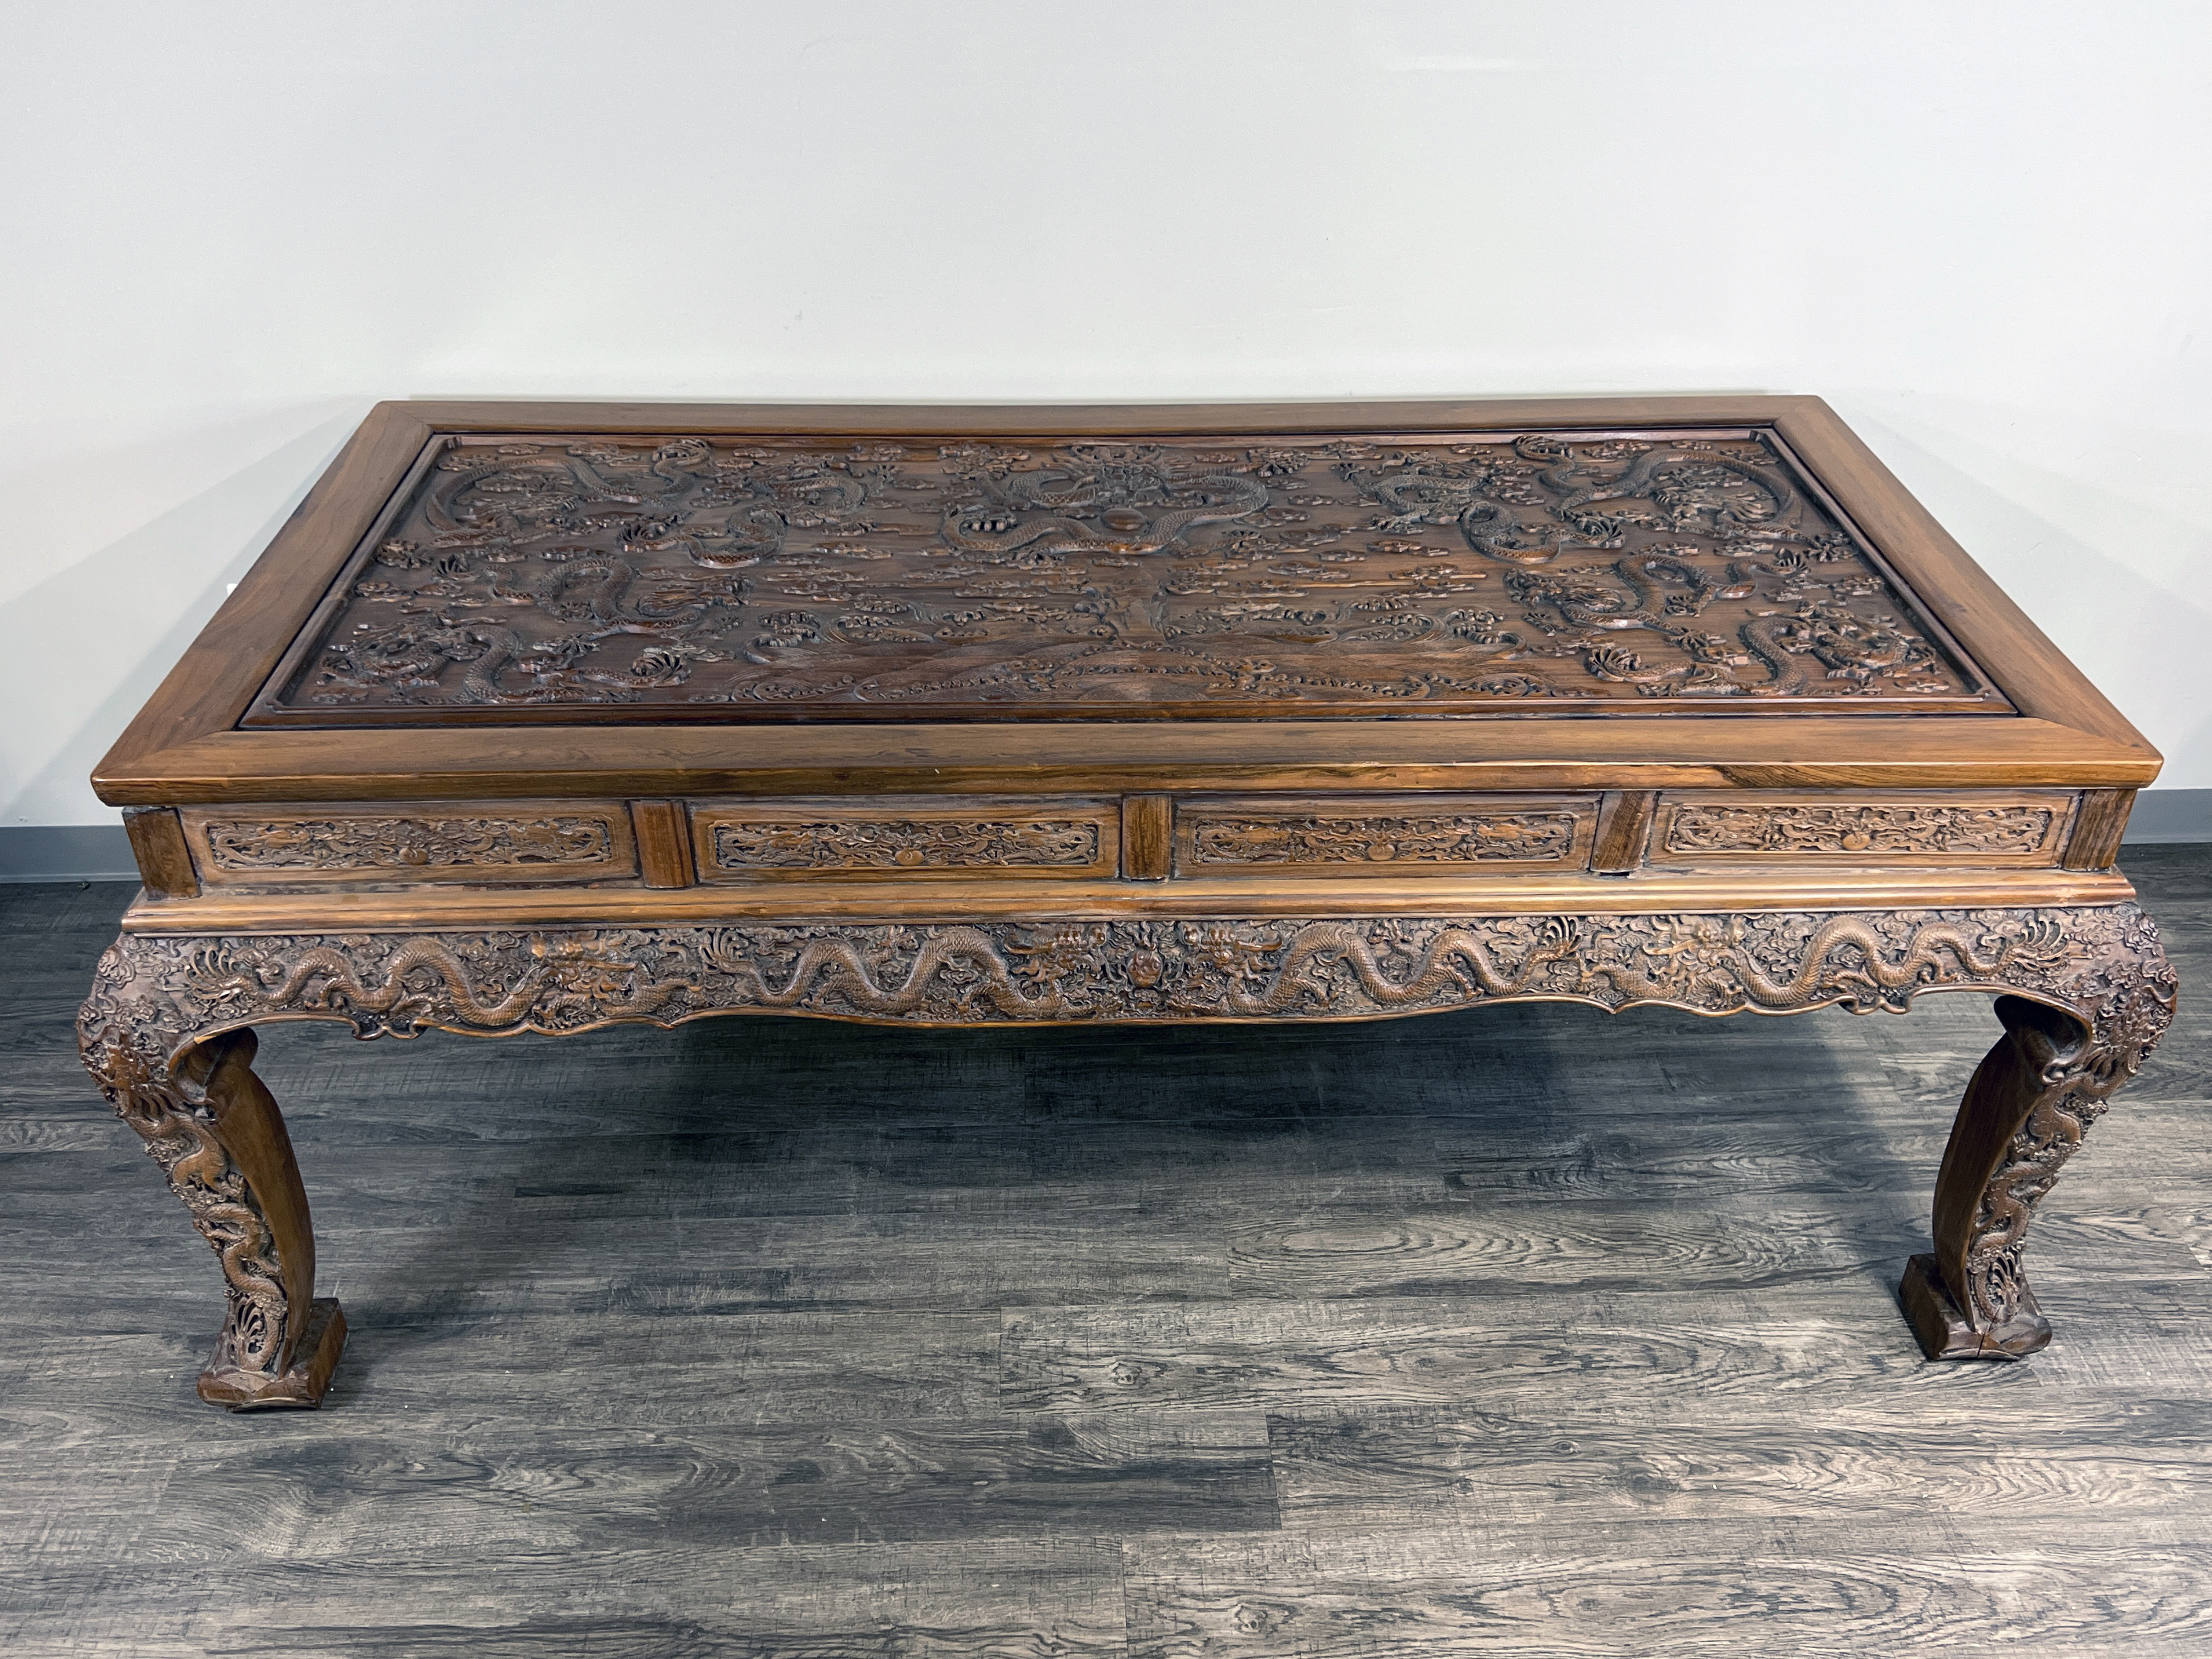 Exquisite Chinese Huanghuali Dragon Table With Detailed Carving image 1